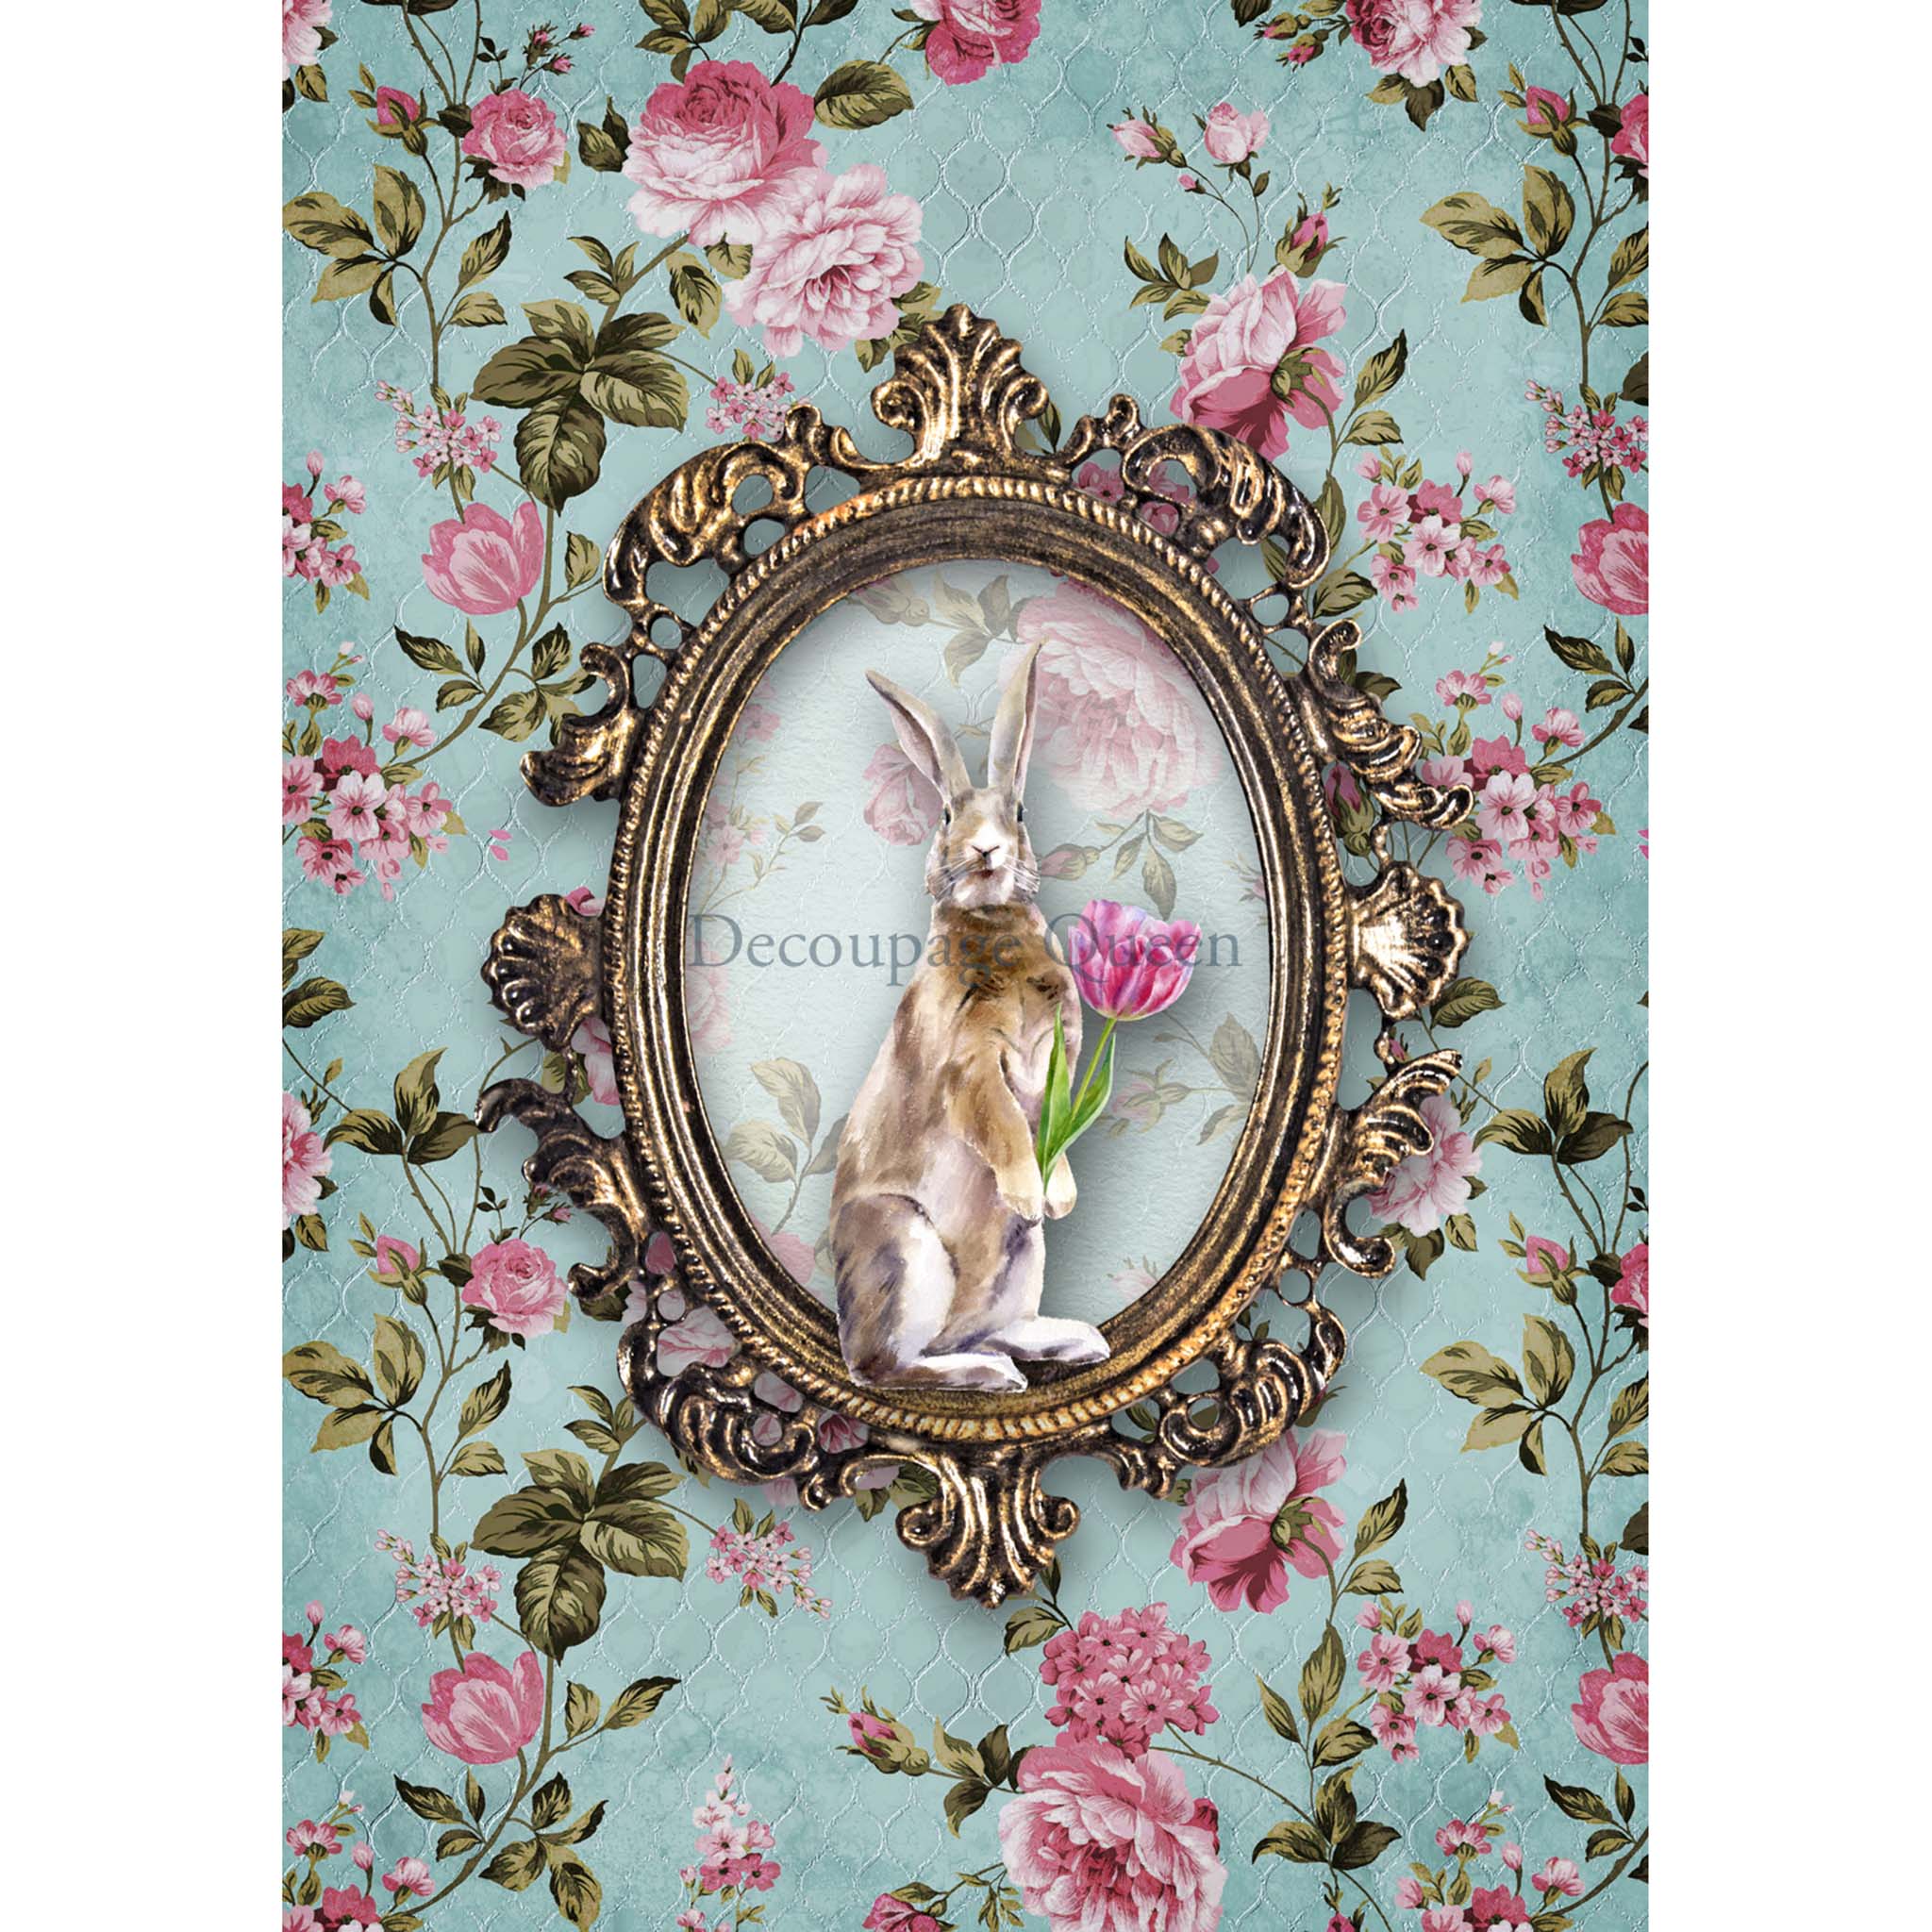 A1 rice paper design that features a charming brown bunny holding a tulip in an ornate frame, surrounded by pink flowers on an aqua background. White borders are on the sides.